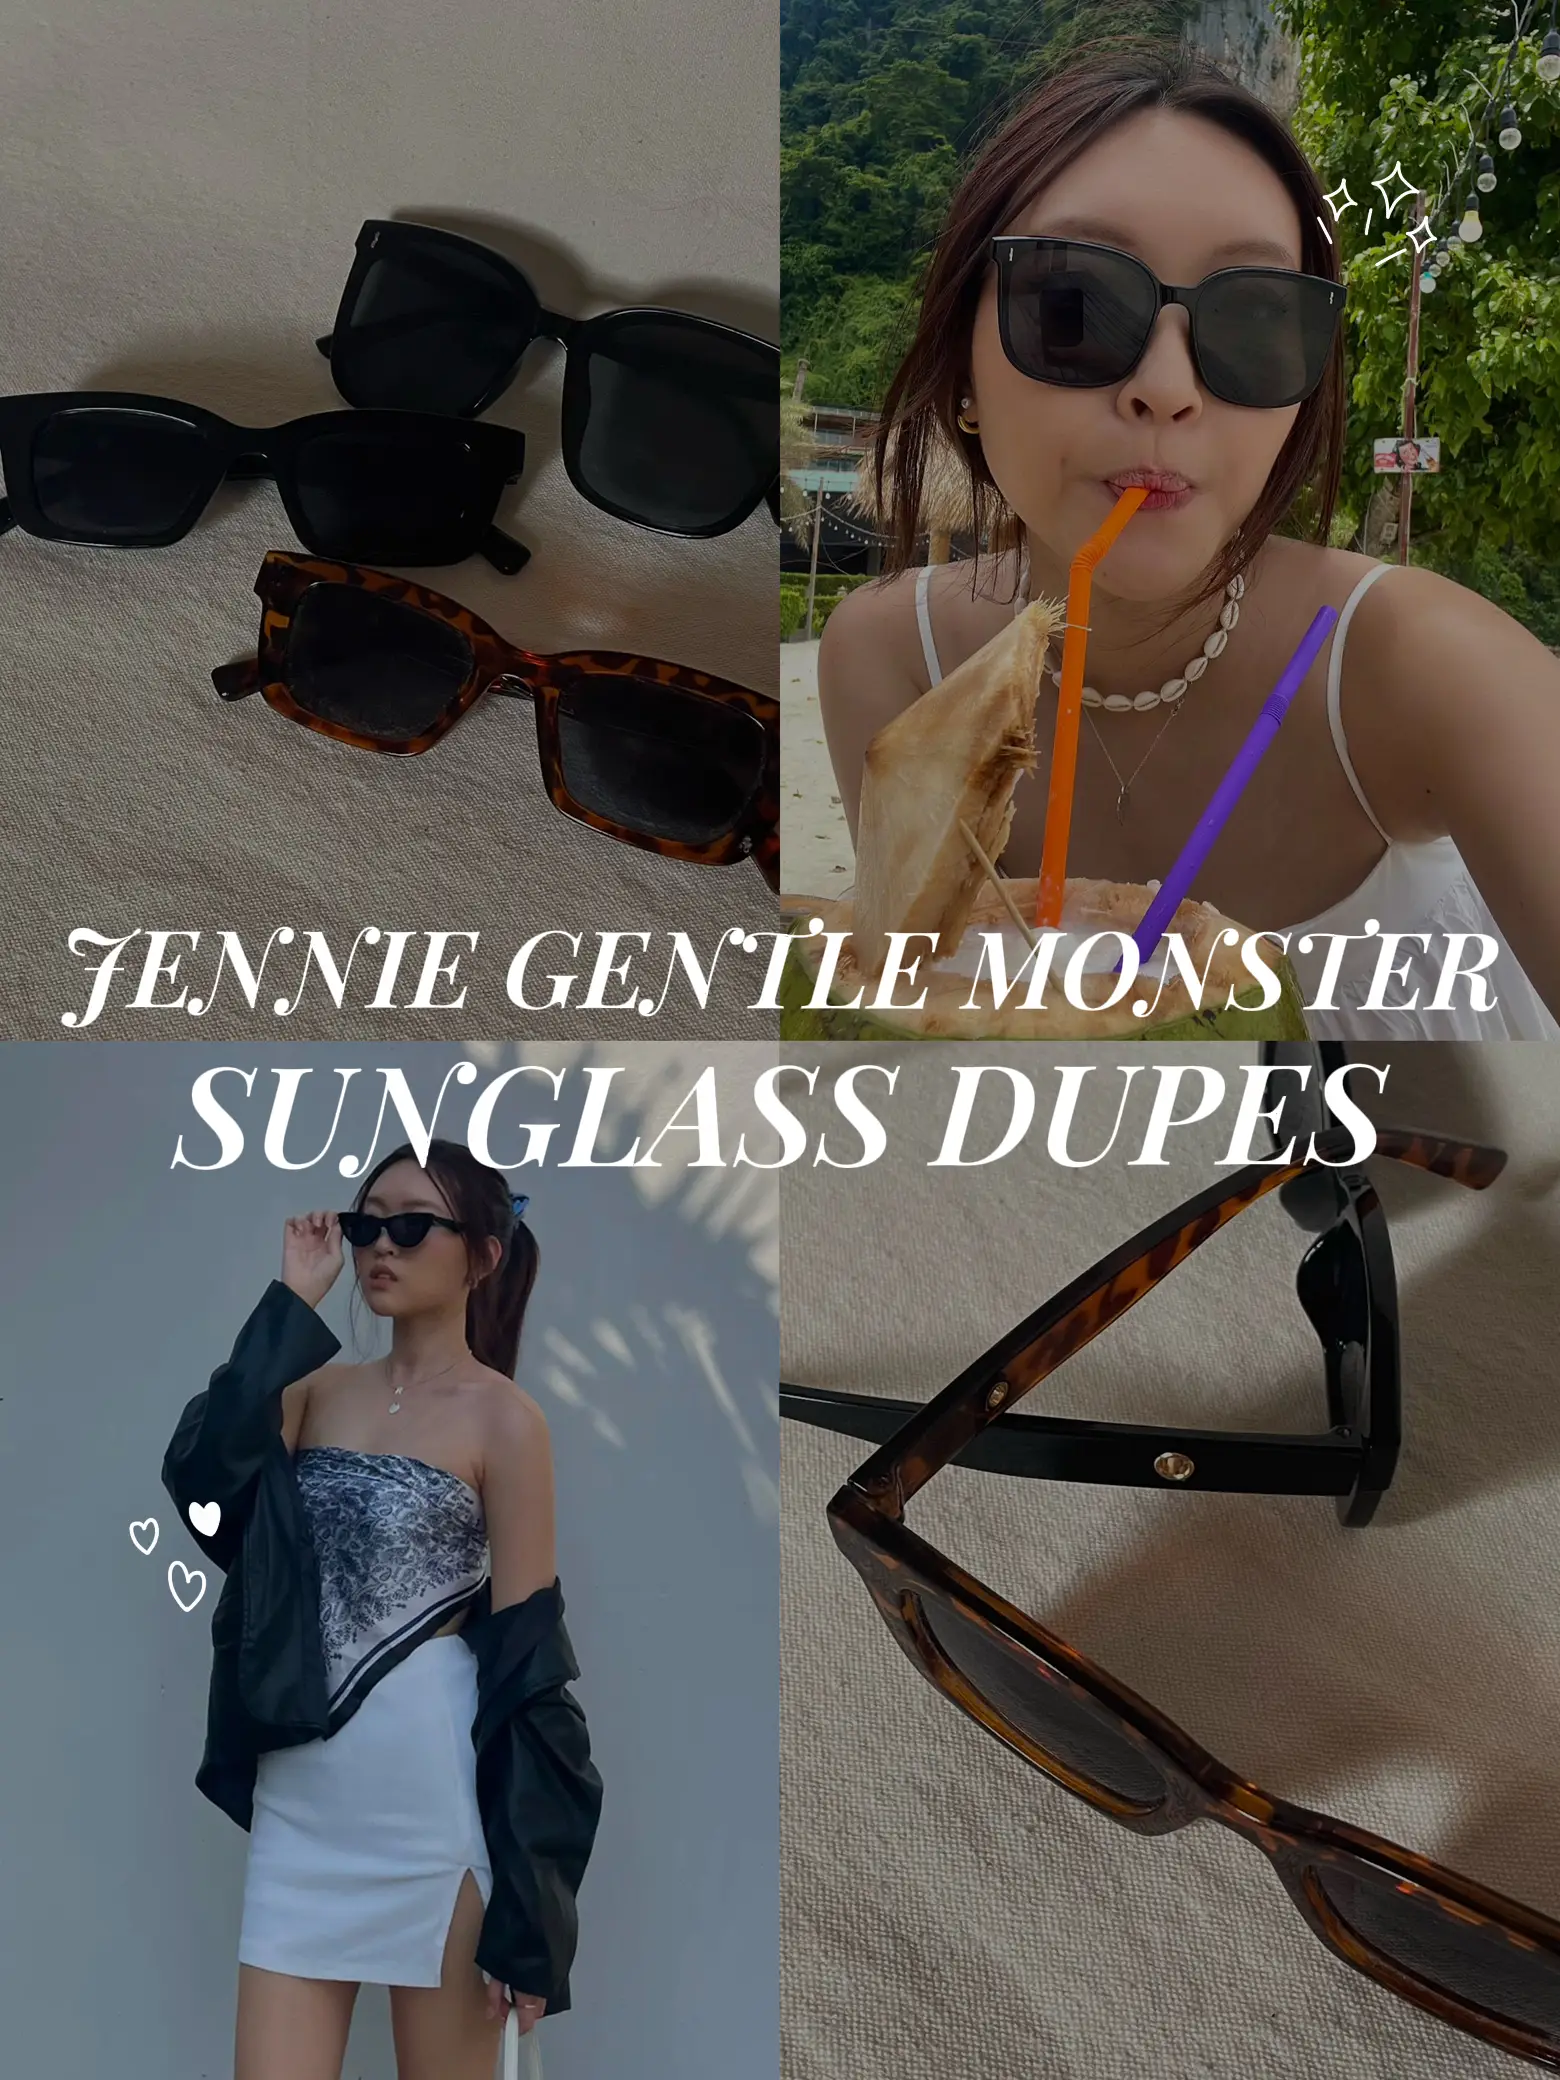 BLACKPINK's Jennie x Gentle Monster Collection Is Finally Here